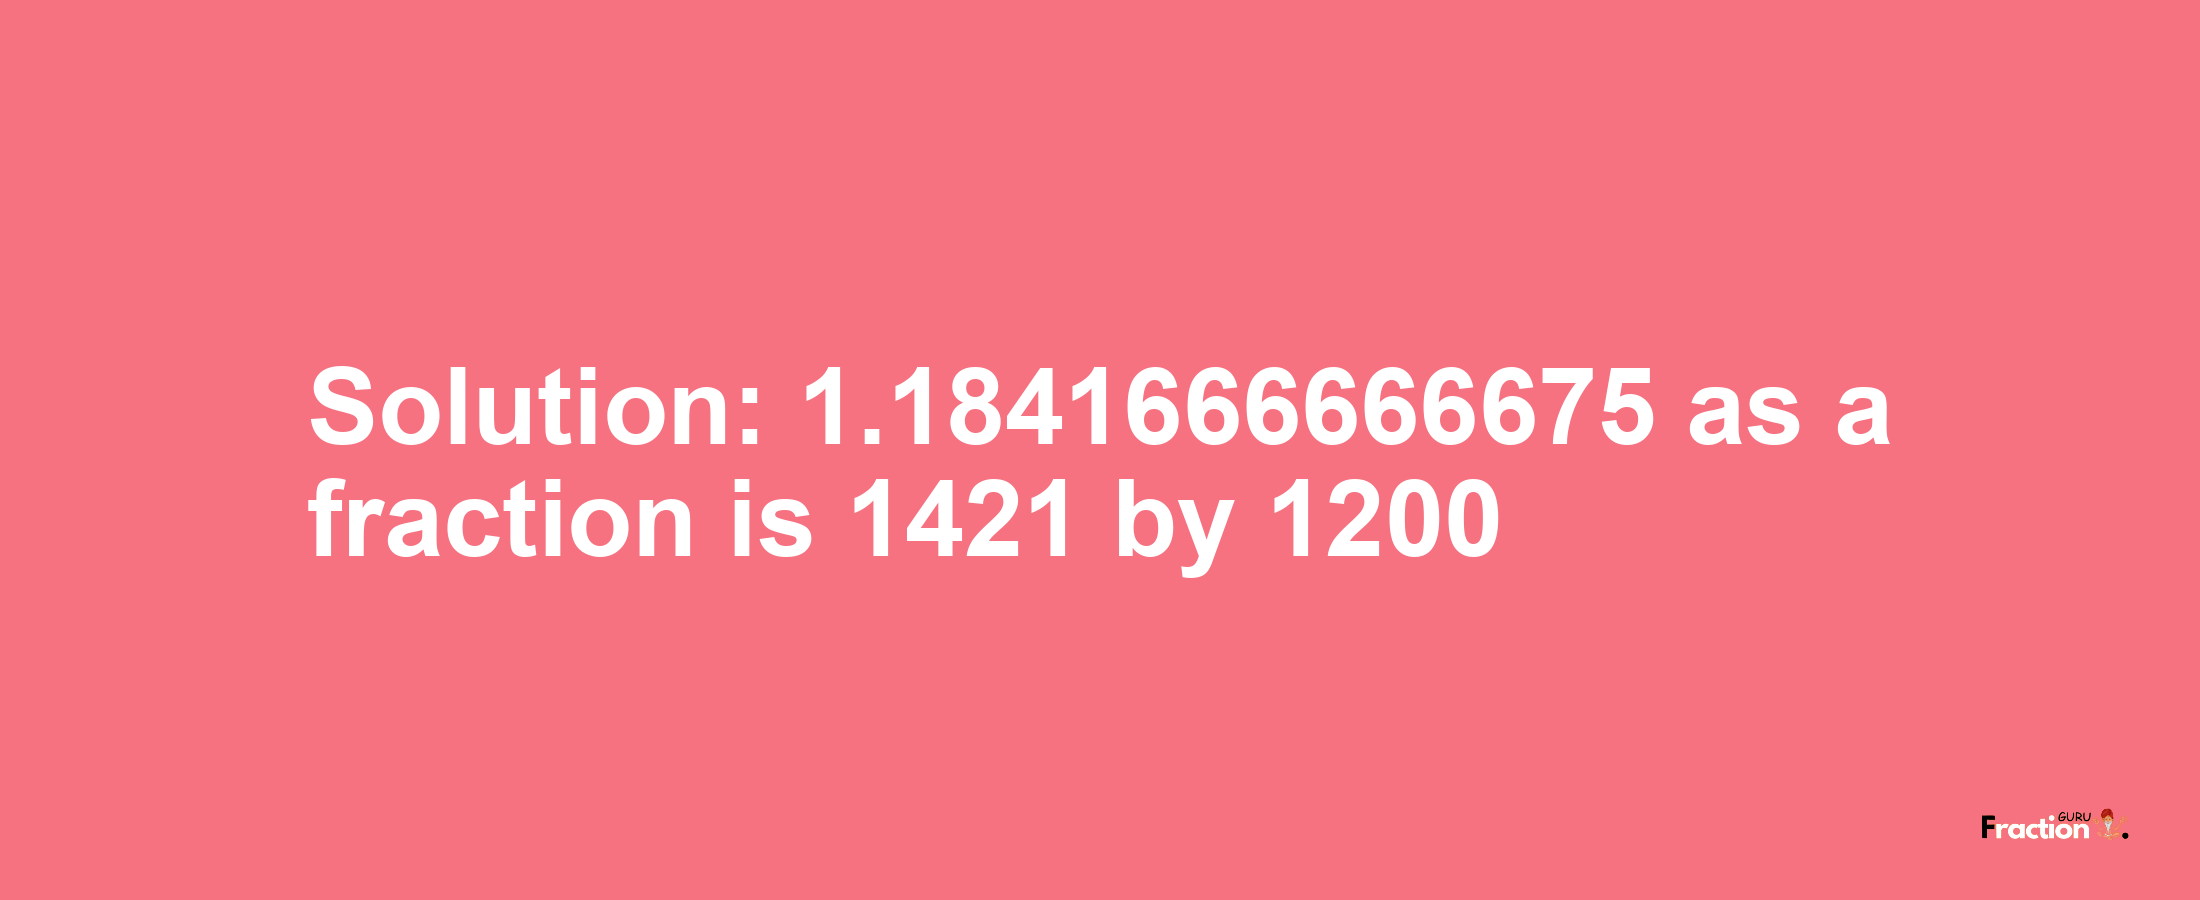 Solution:1.1841666666675 as a fraction is 1421/1200